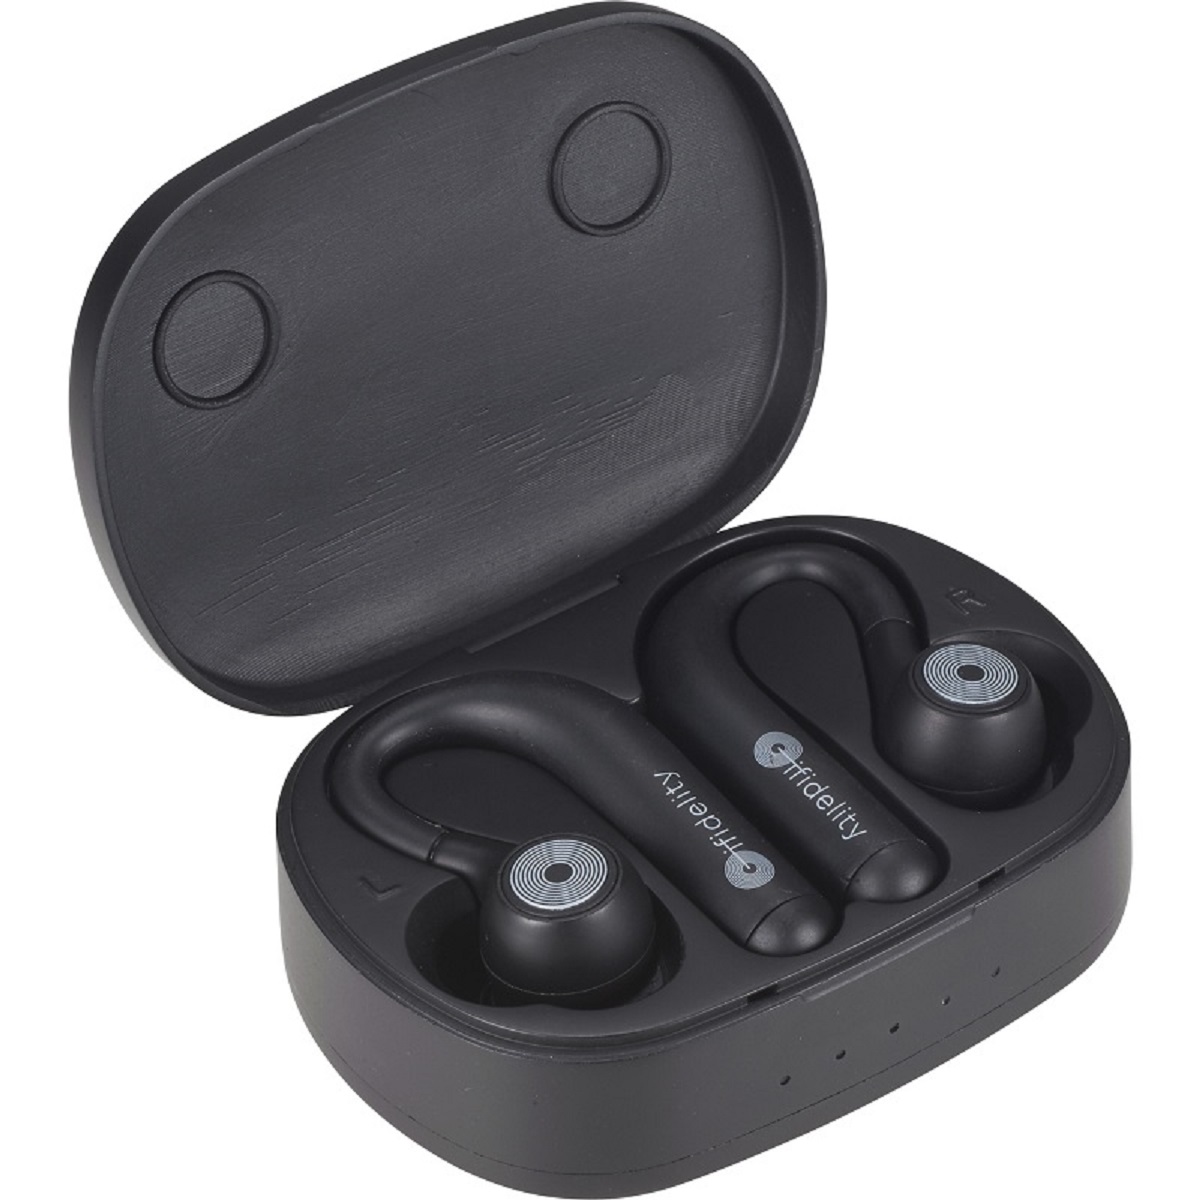 How To Pair True Wireless Earbuds